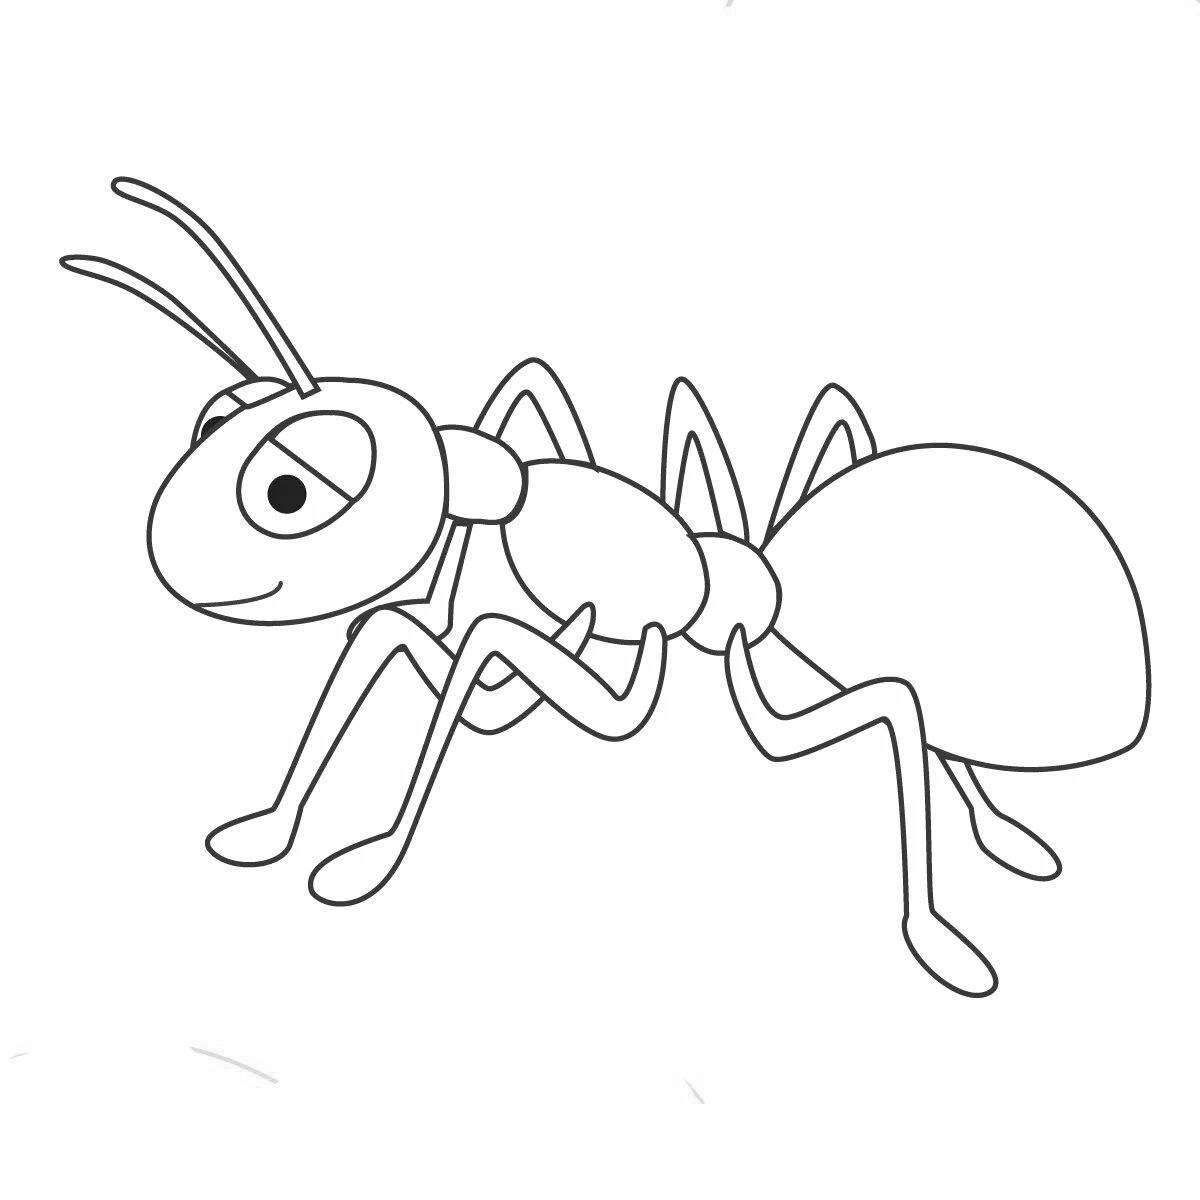 Unique insect coloring pages